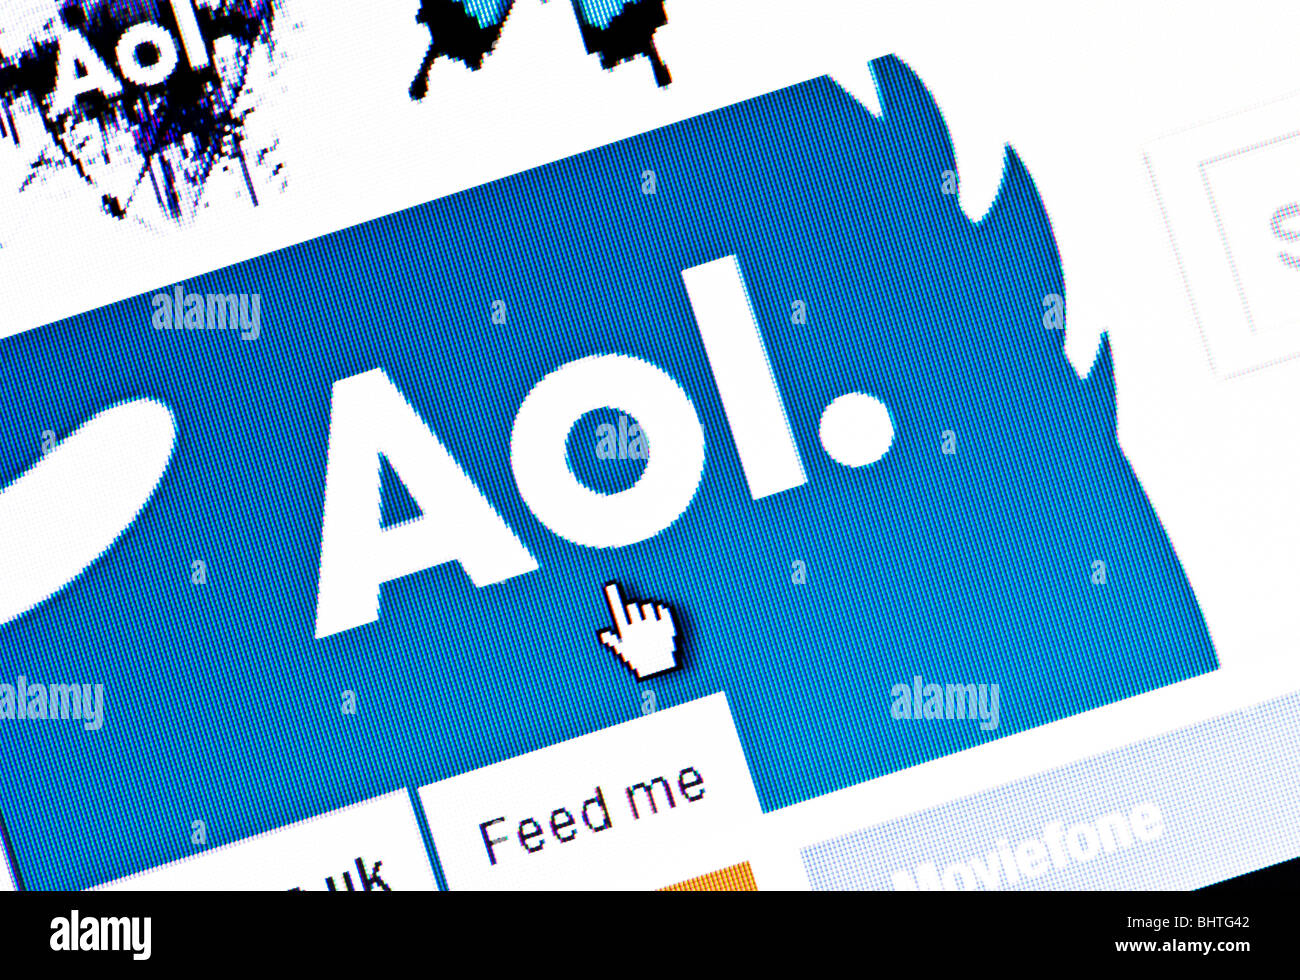 Macro screenshot of the AOL website featuring the new corporate logo introduced in 2009 when AOL split from Time Warner. Stock Photo